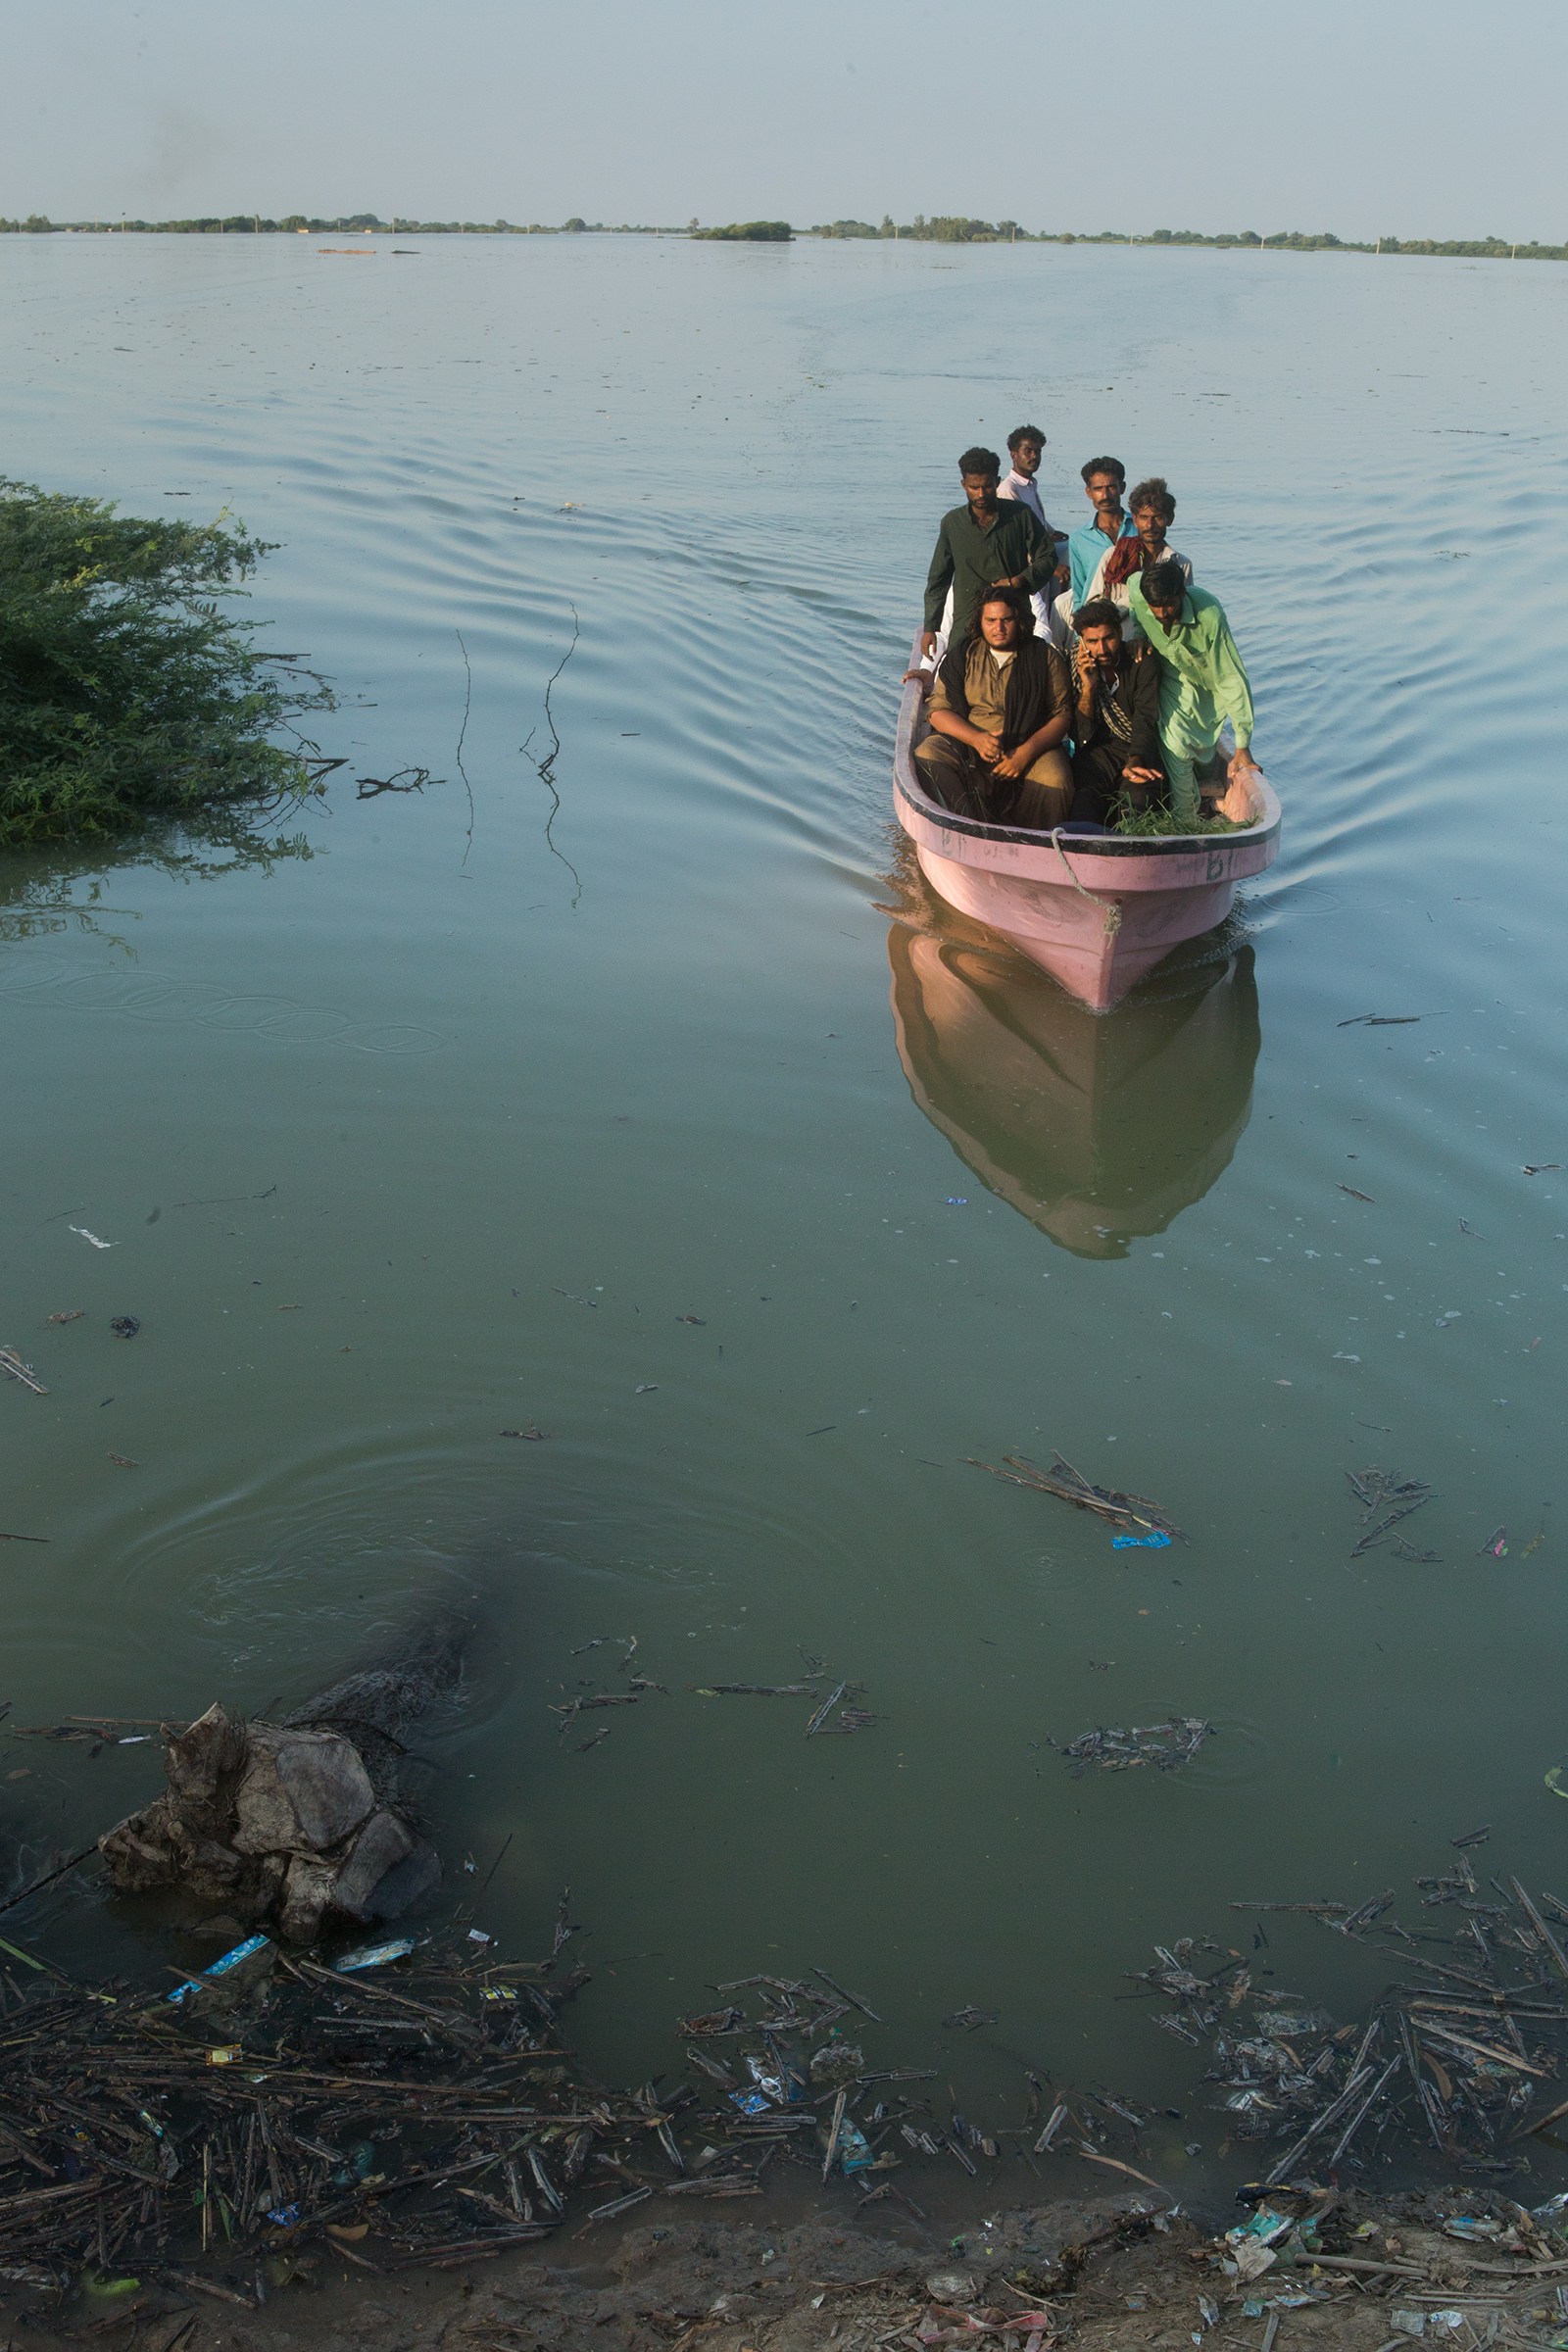 “I lost my son in this water a few days ago.” Photos of Pakistan's catastrophic floods